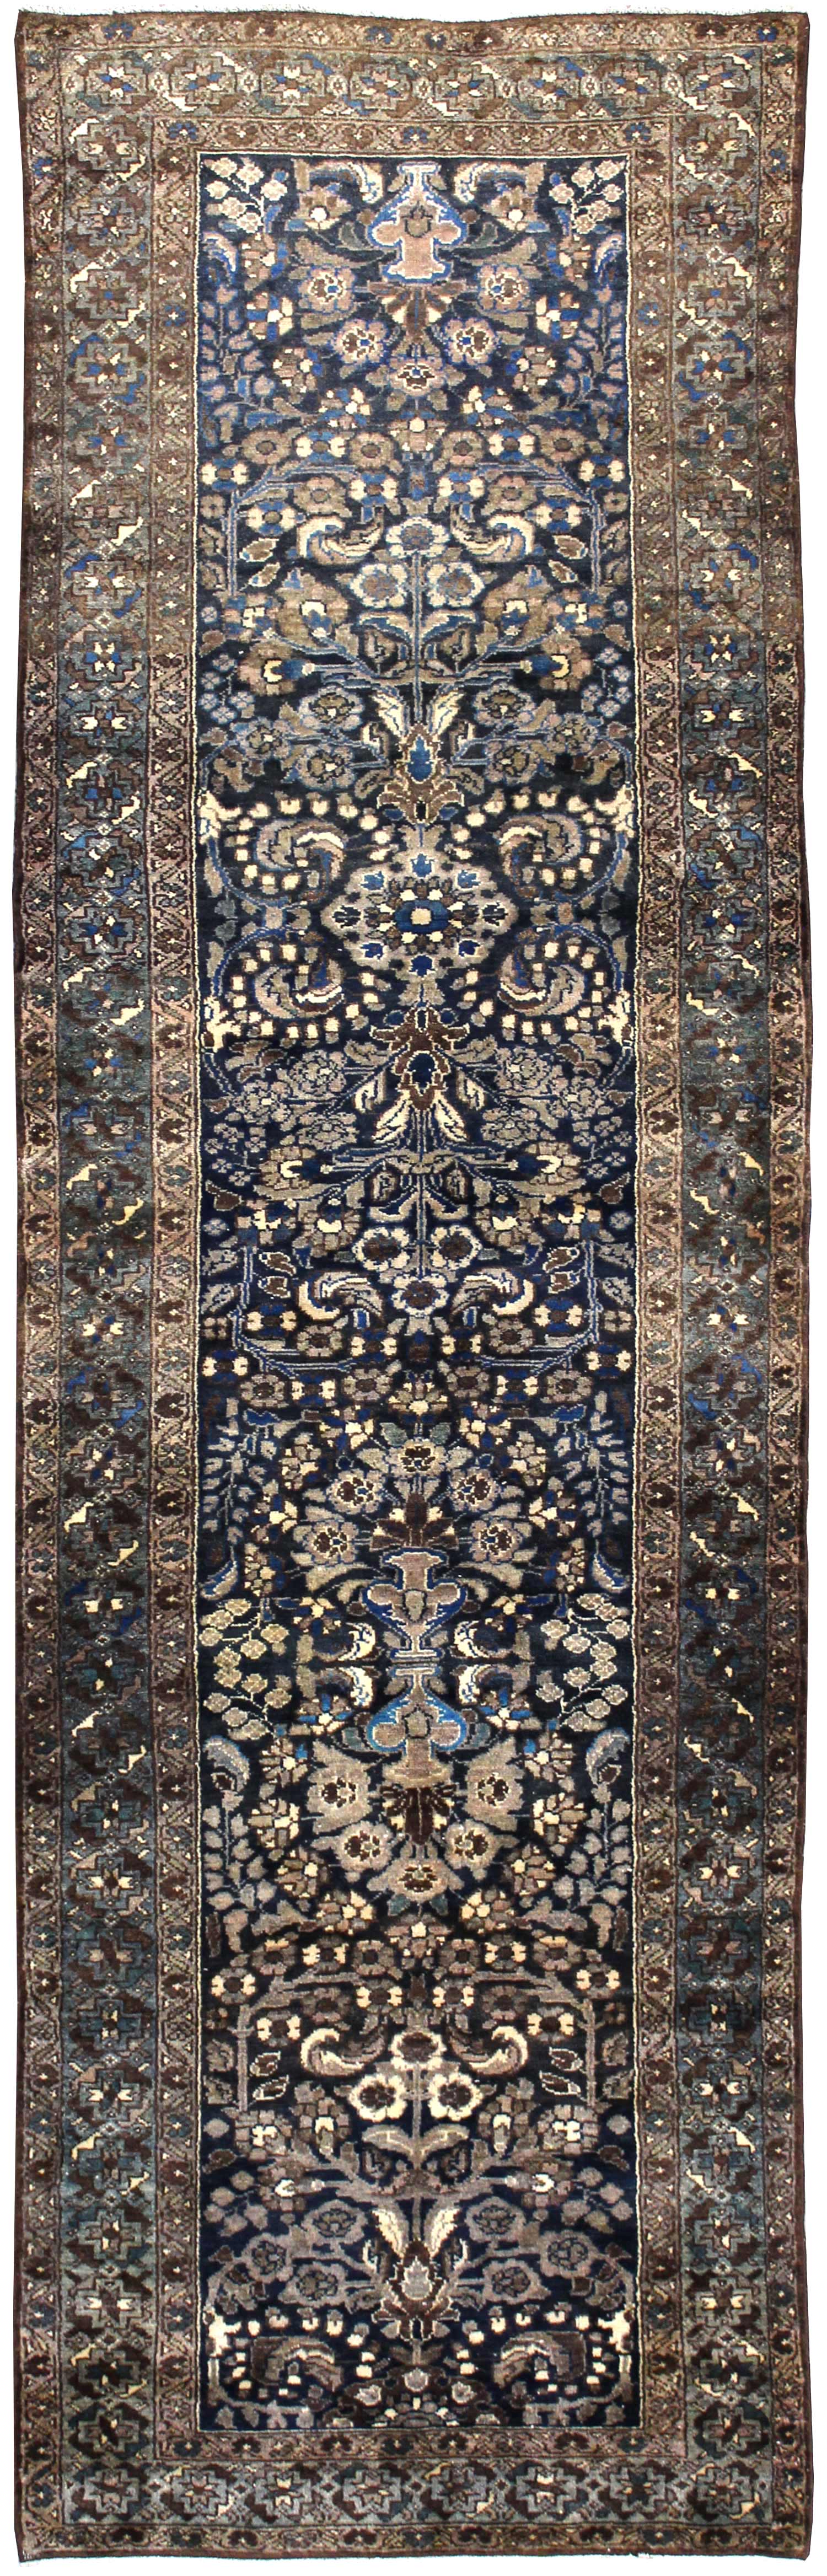 Antique Malayer Handwoven Traditional Rug